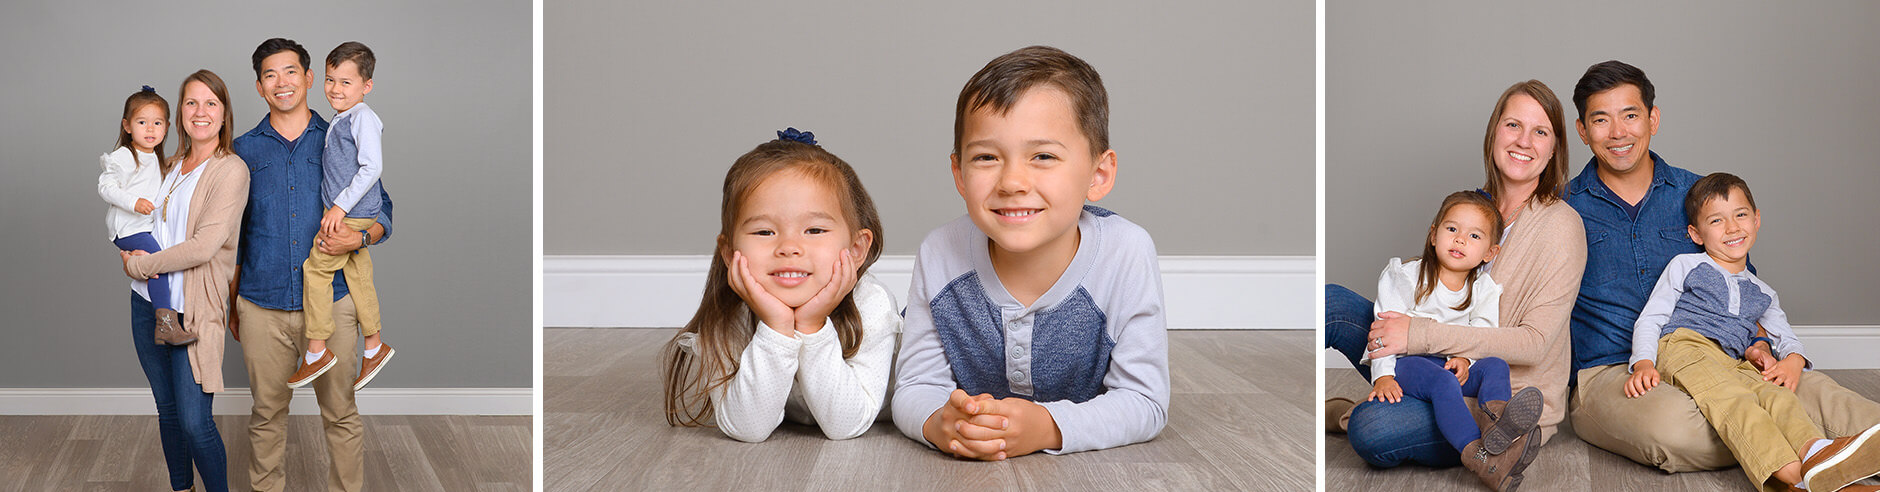 Family photography session captured at JCPenney Portrait Studios.